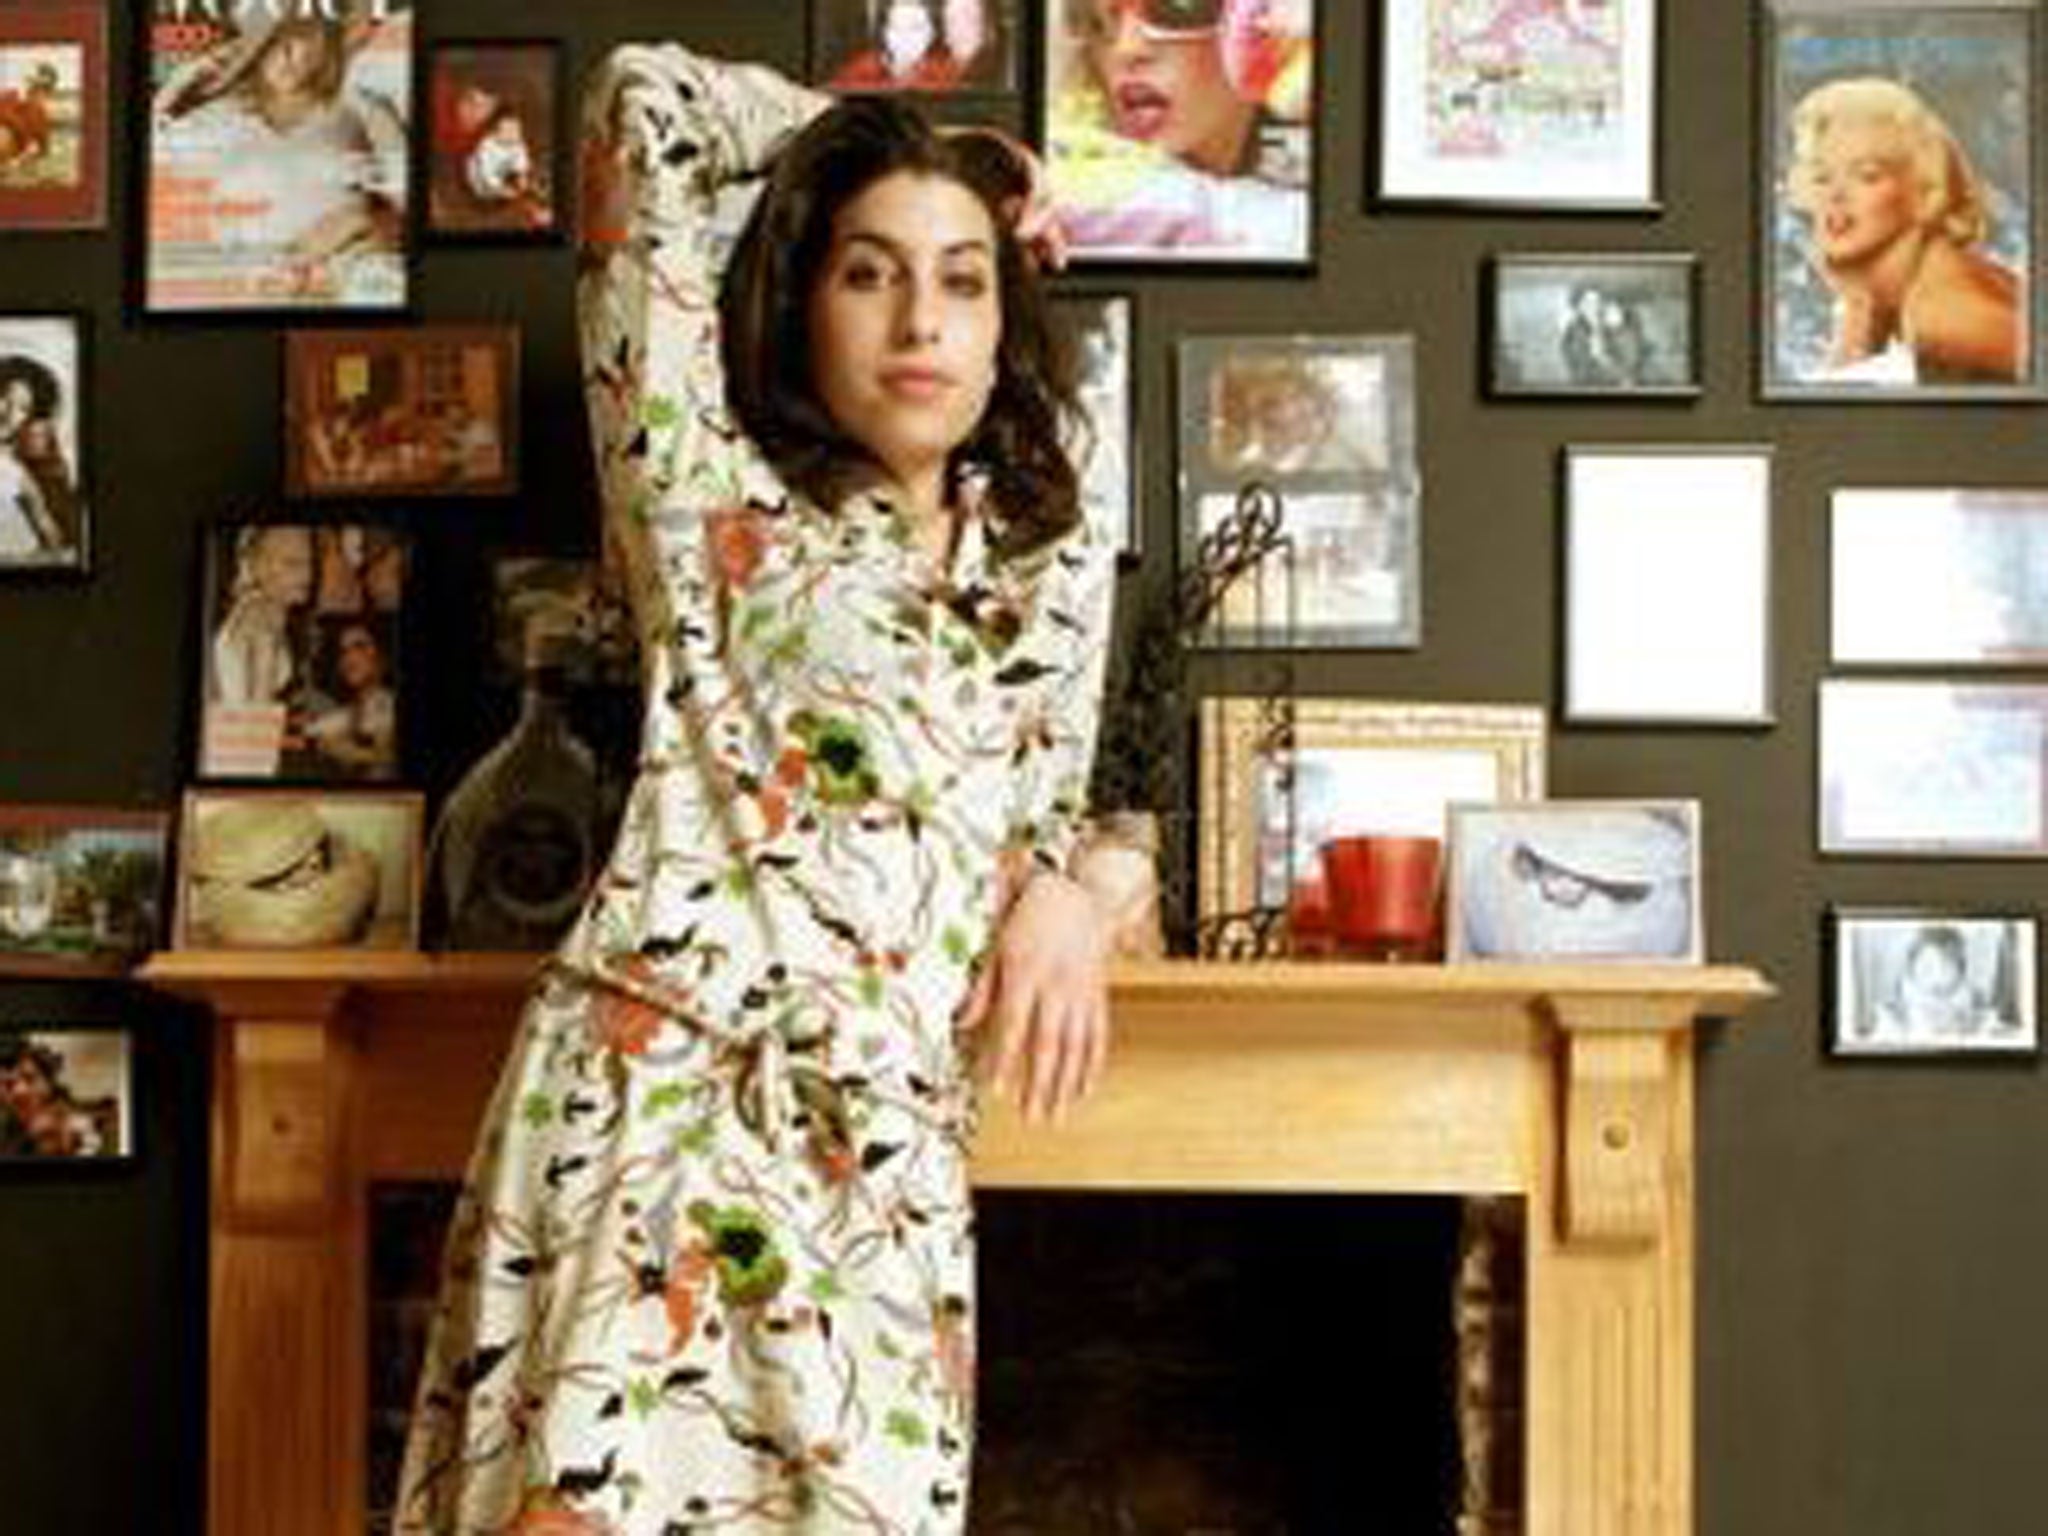 Amy Winehouse poses for photos at her home in Camden, London